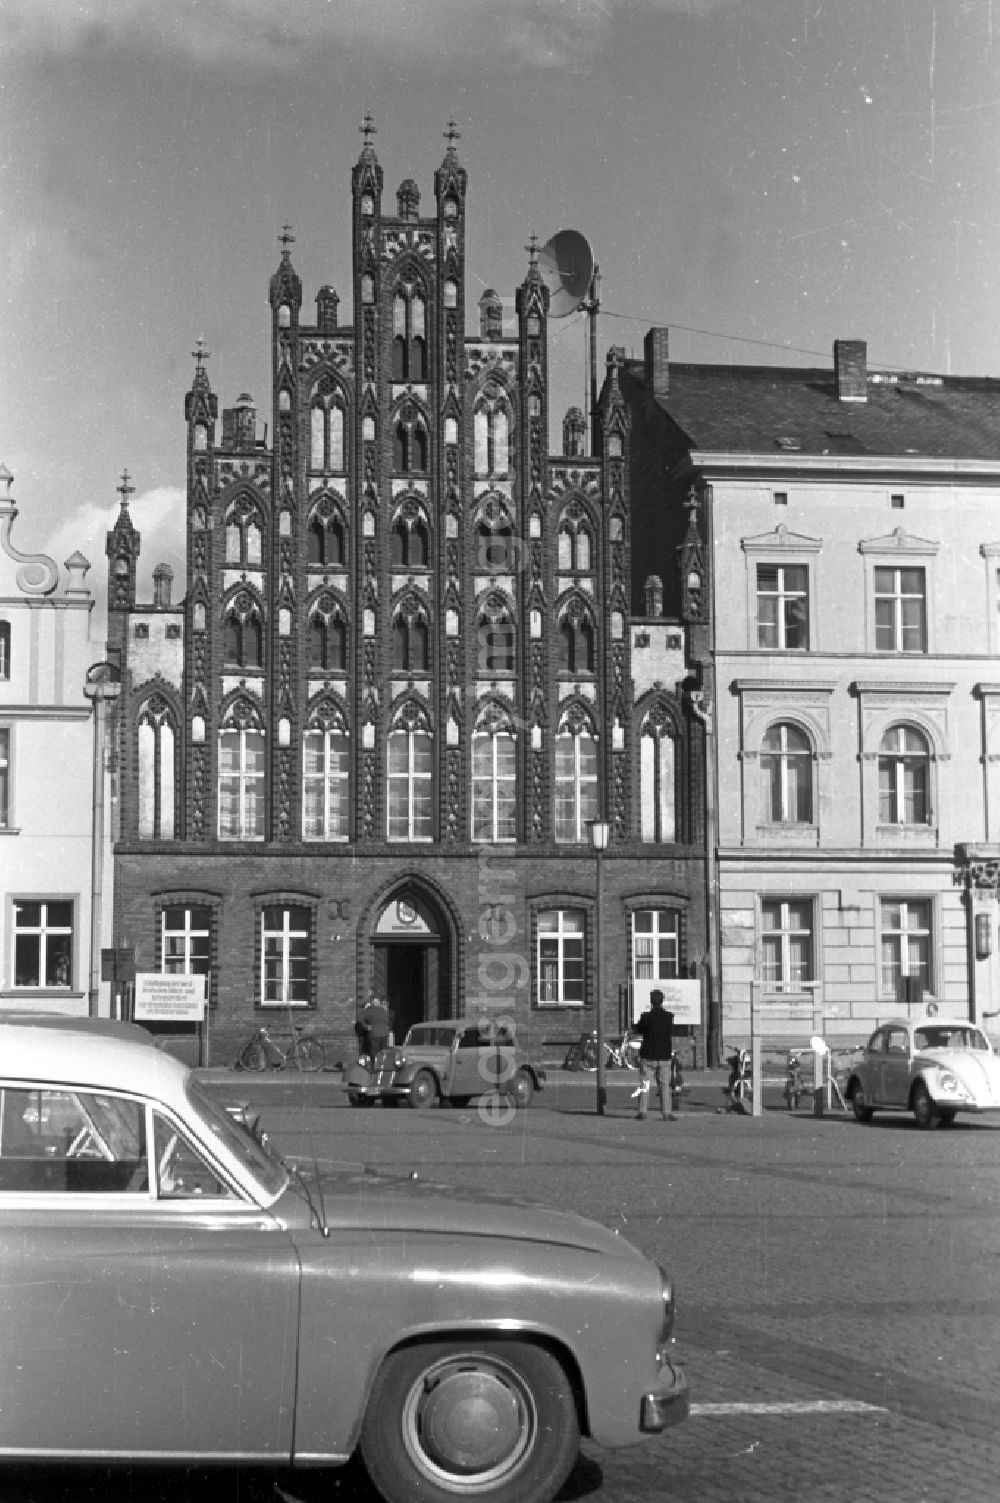 GDR photo archive: Greifswald - The historic old town of Greifswald in Mecklenburg - Western Pomerania